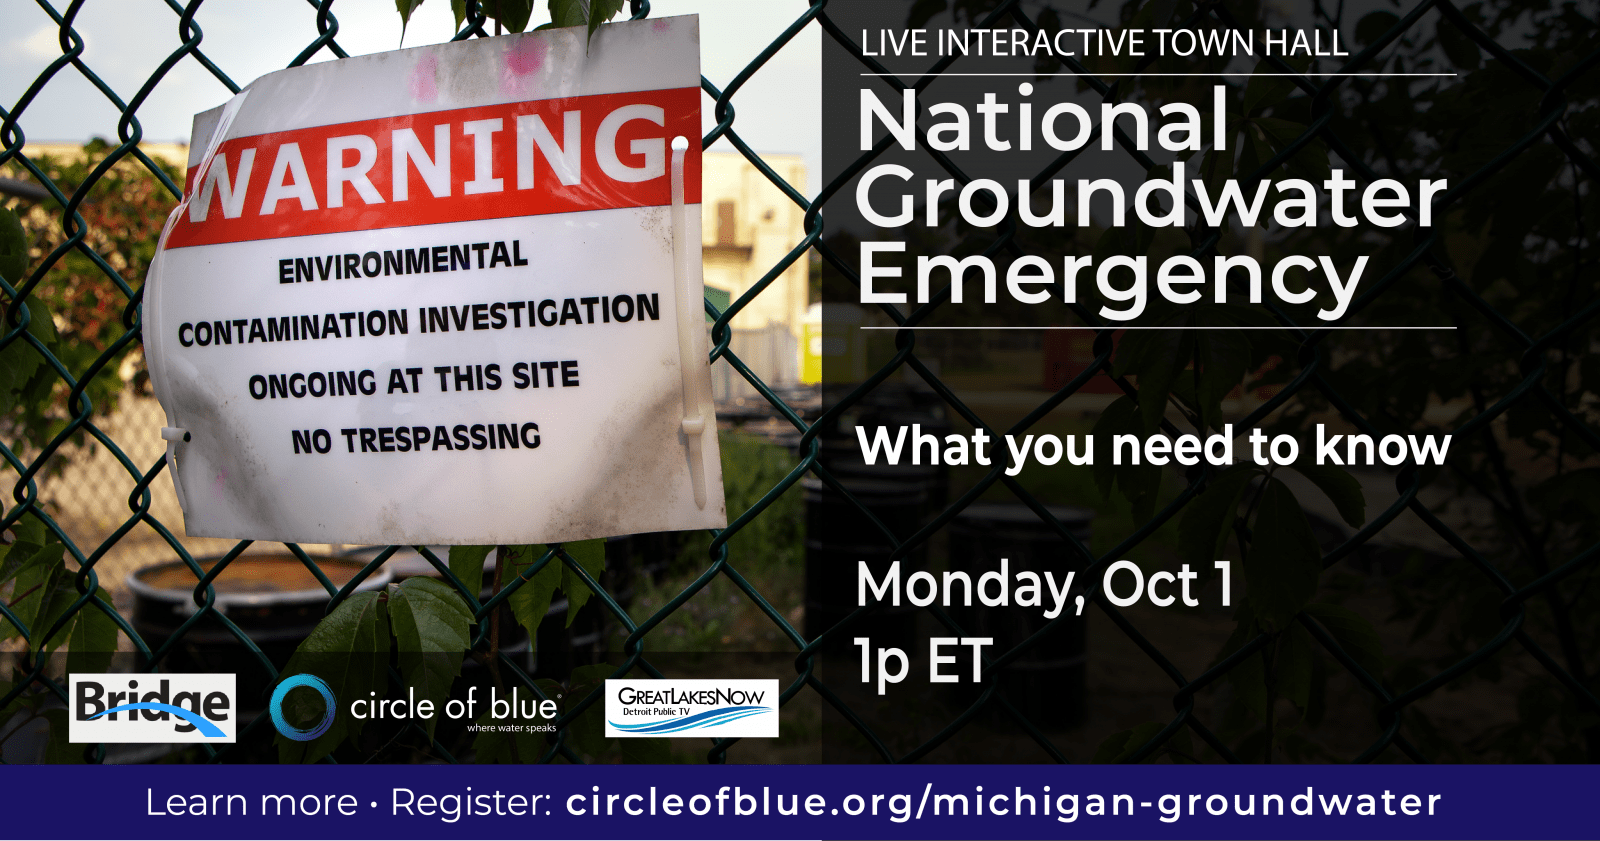 National Groundwater Emergency - Monday, Oct 1 1pm